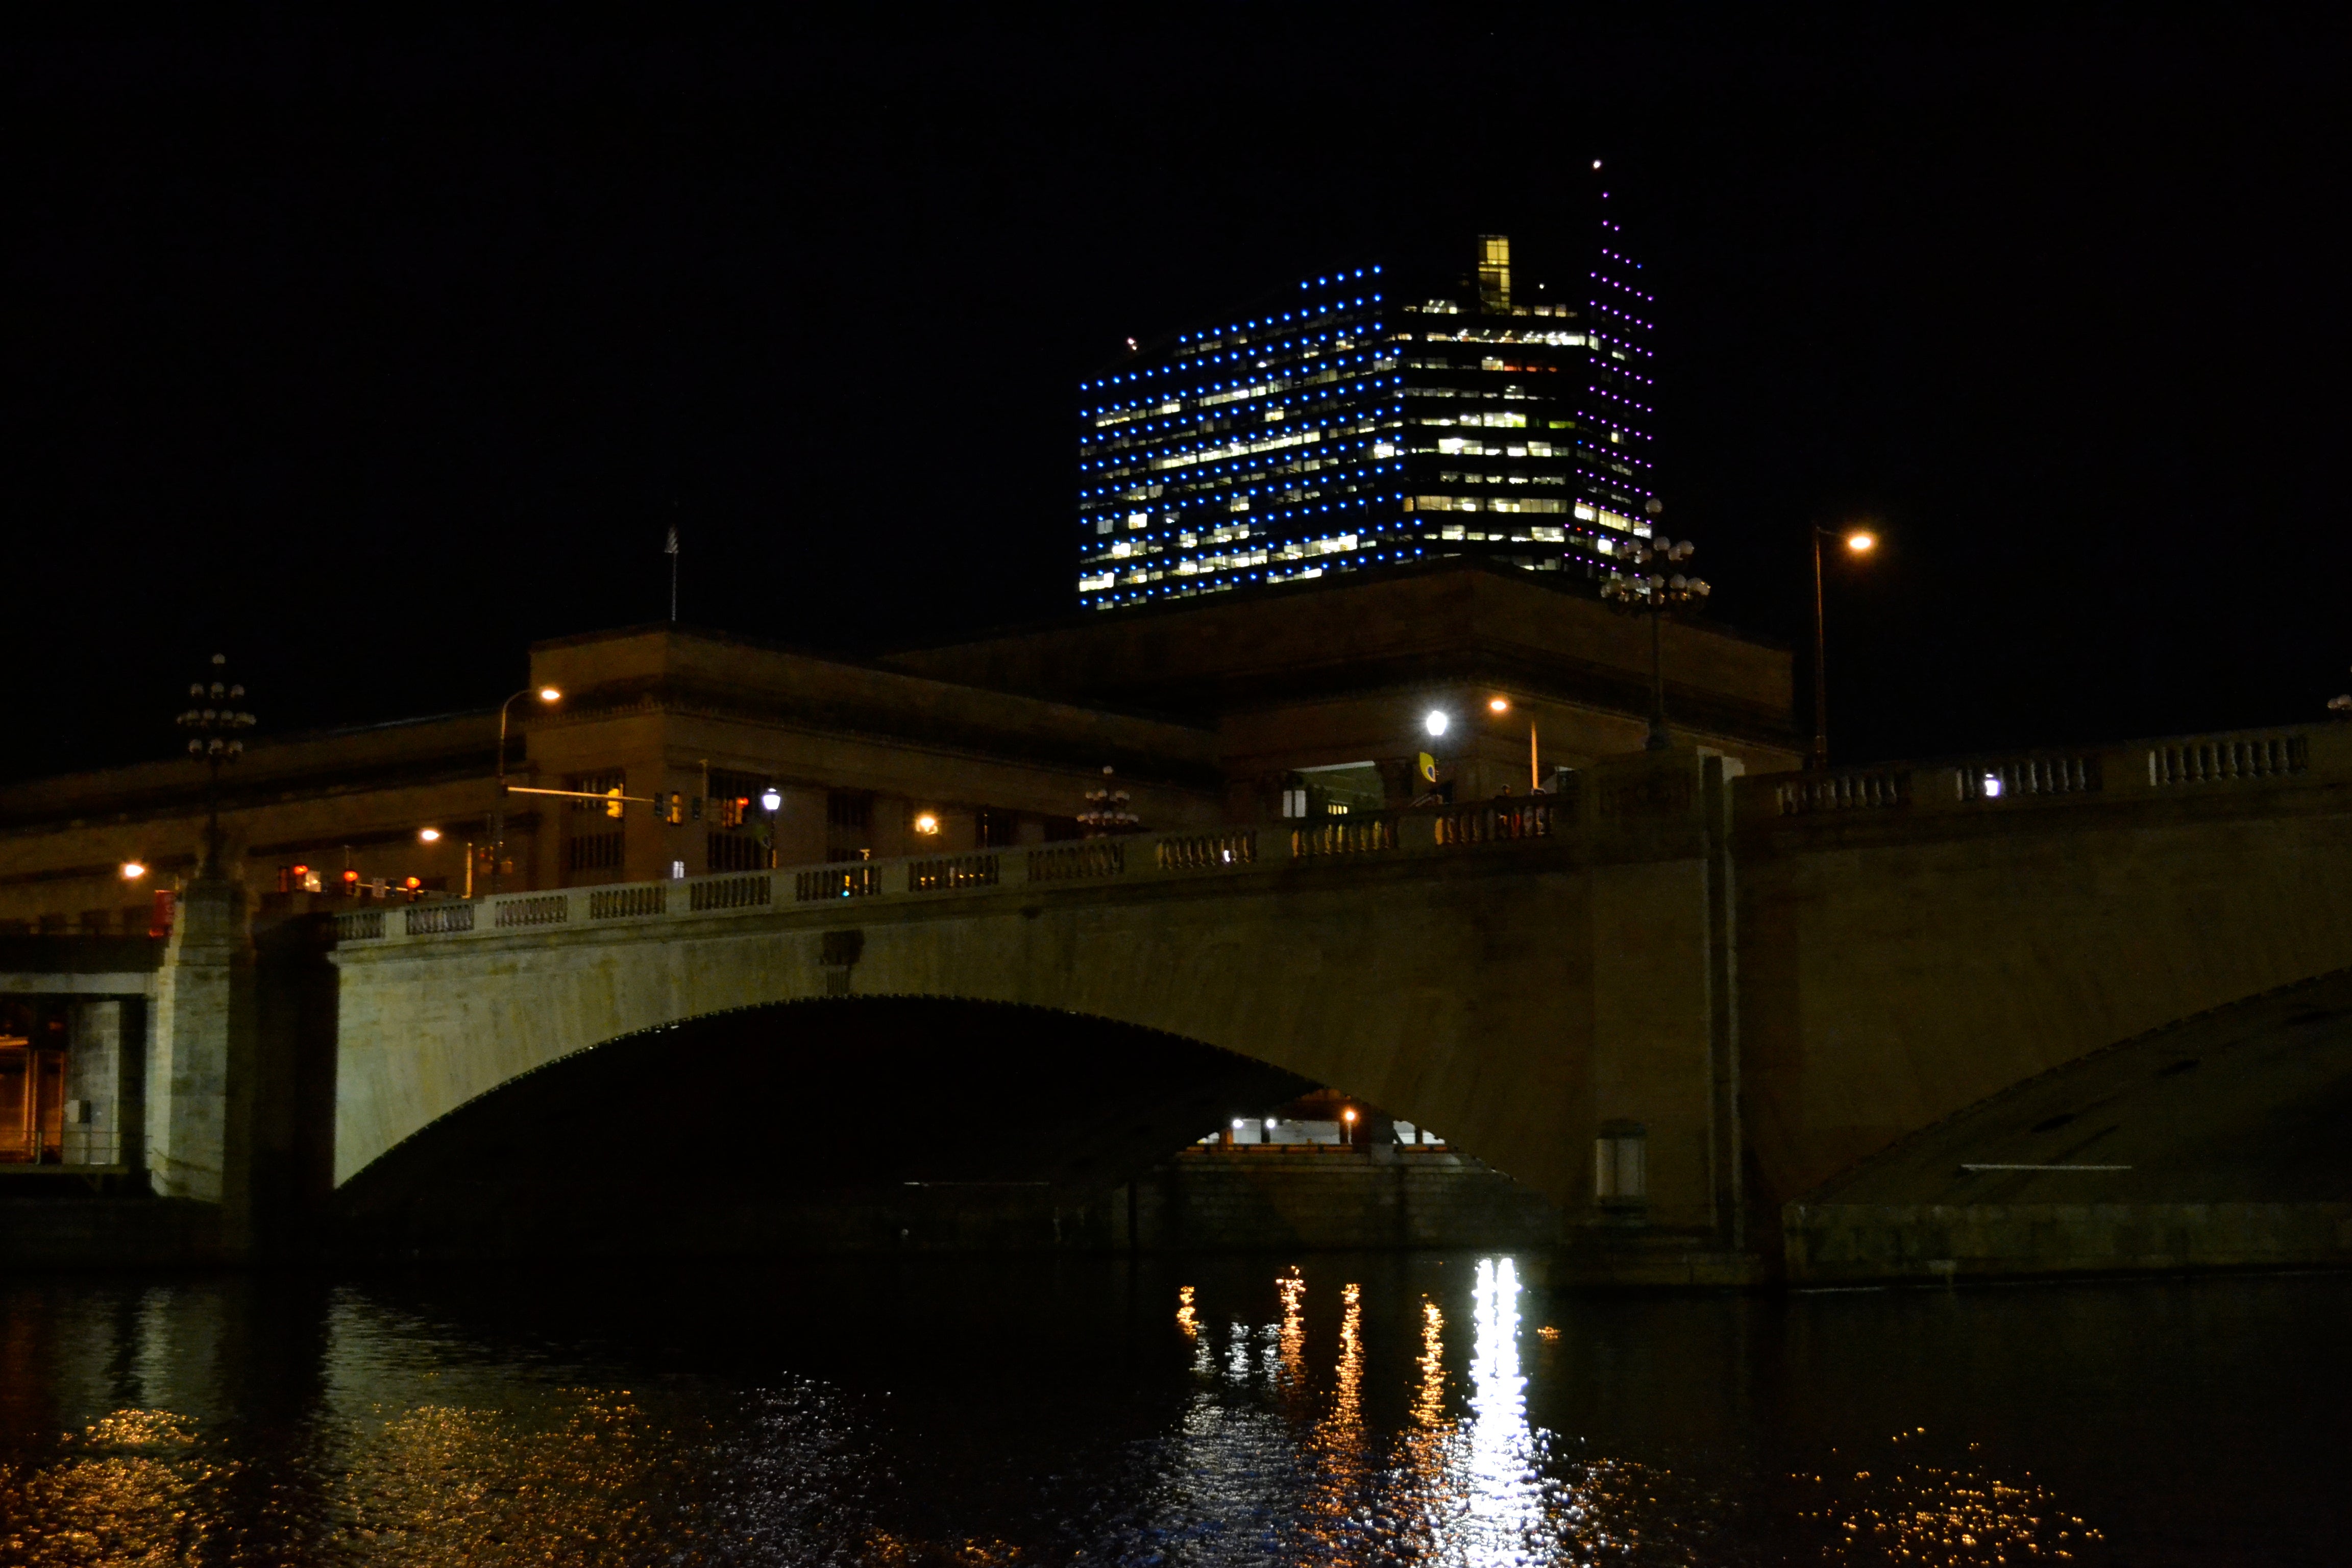 30th Street Bridge with 30th Street Station hidden in the background, pre-lighting